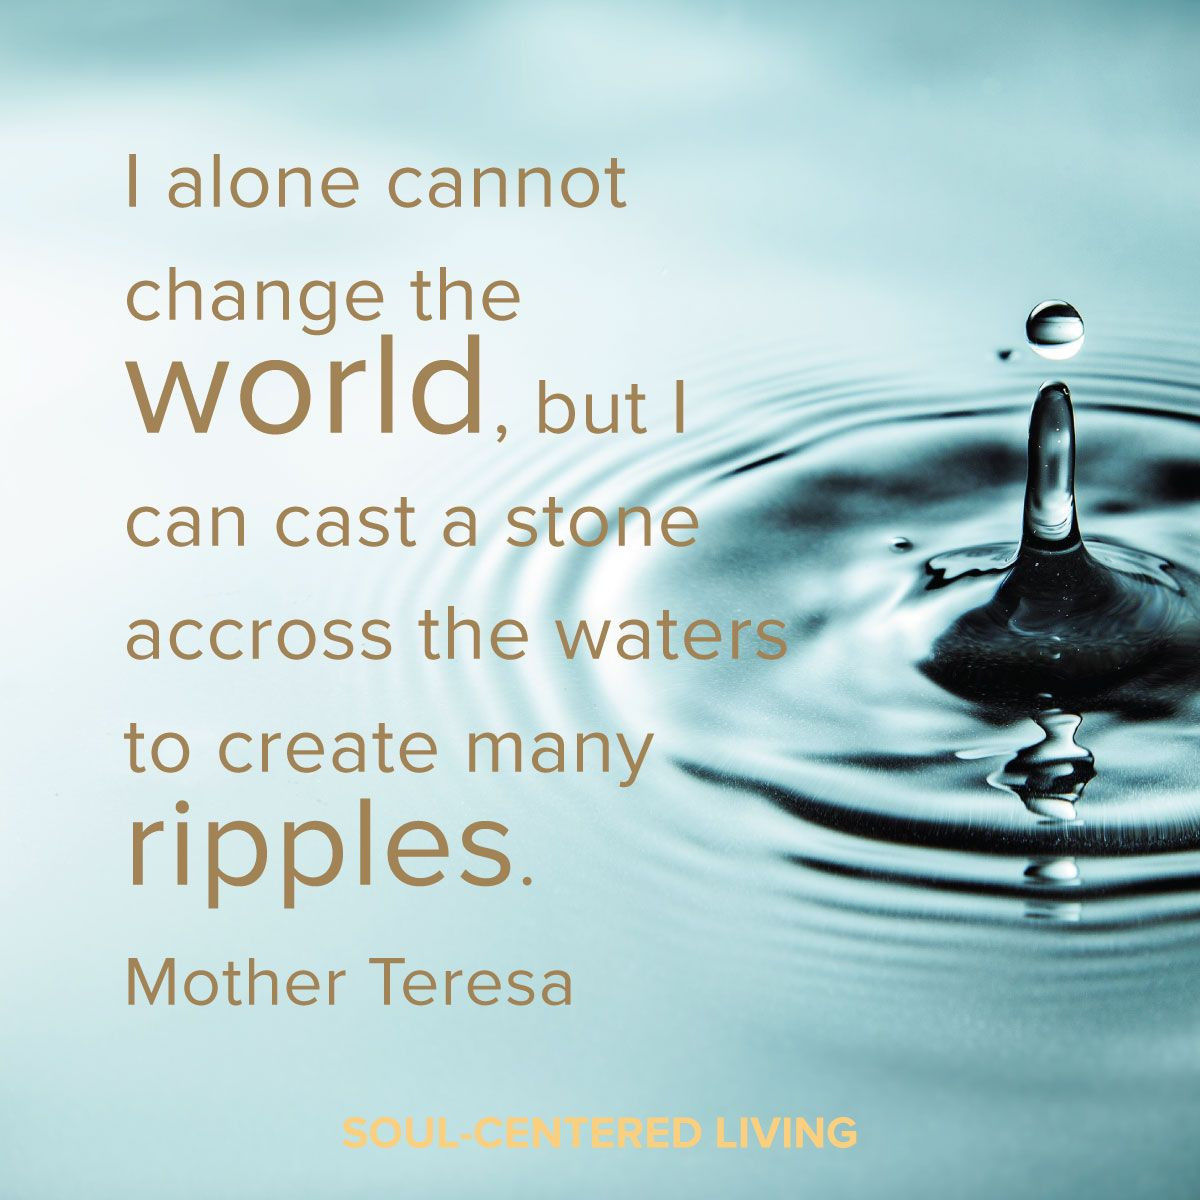 Mother Teresa Ripple Quote
 "I alone cannot change the world but I can cast a stone